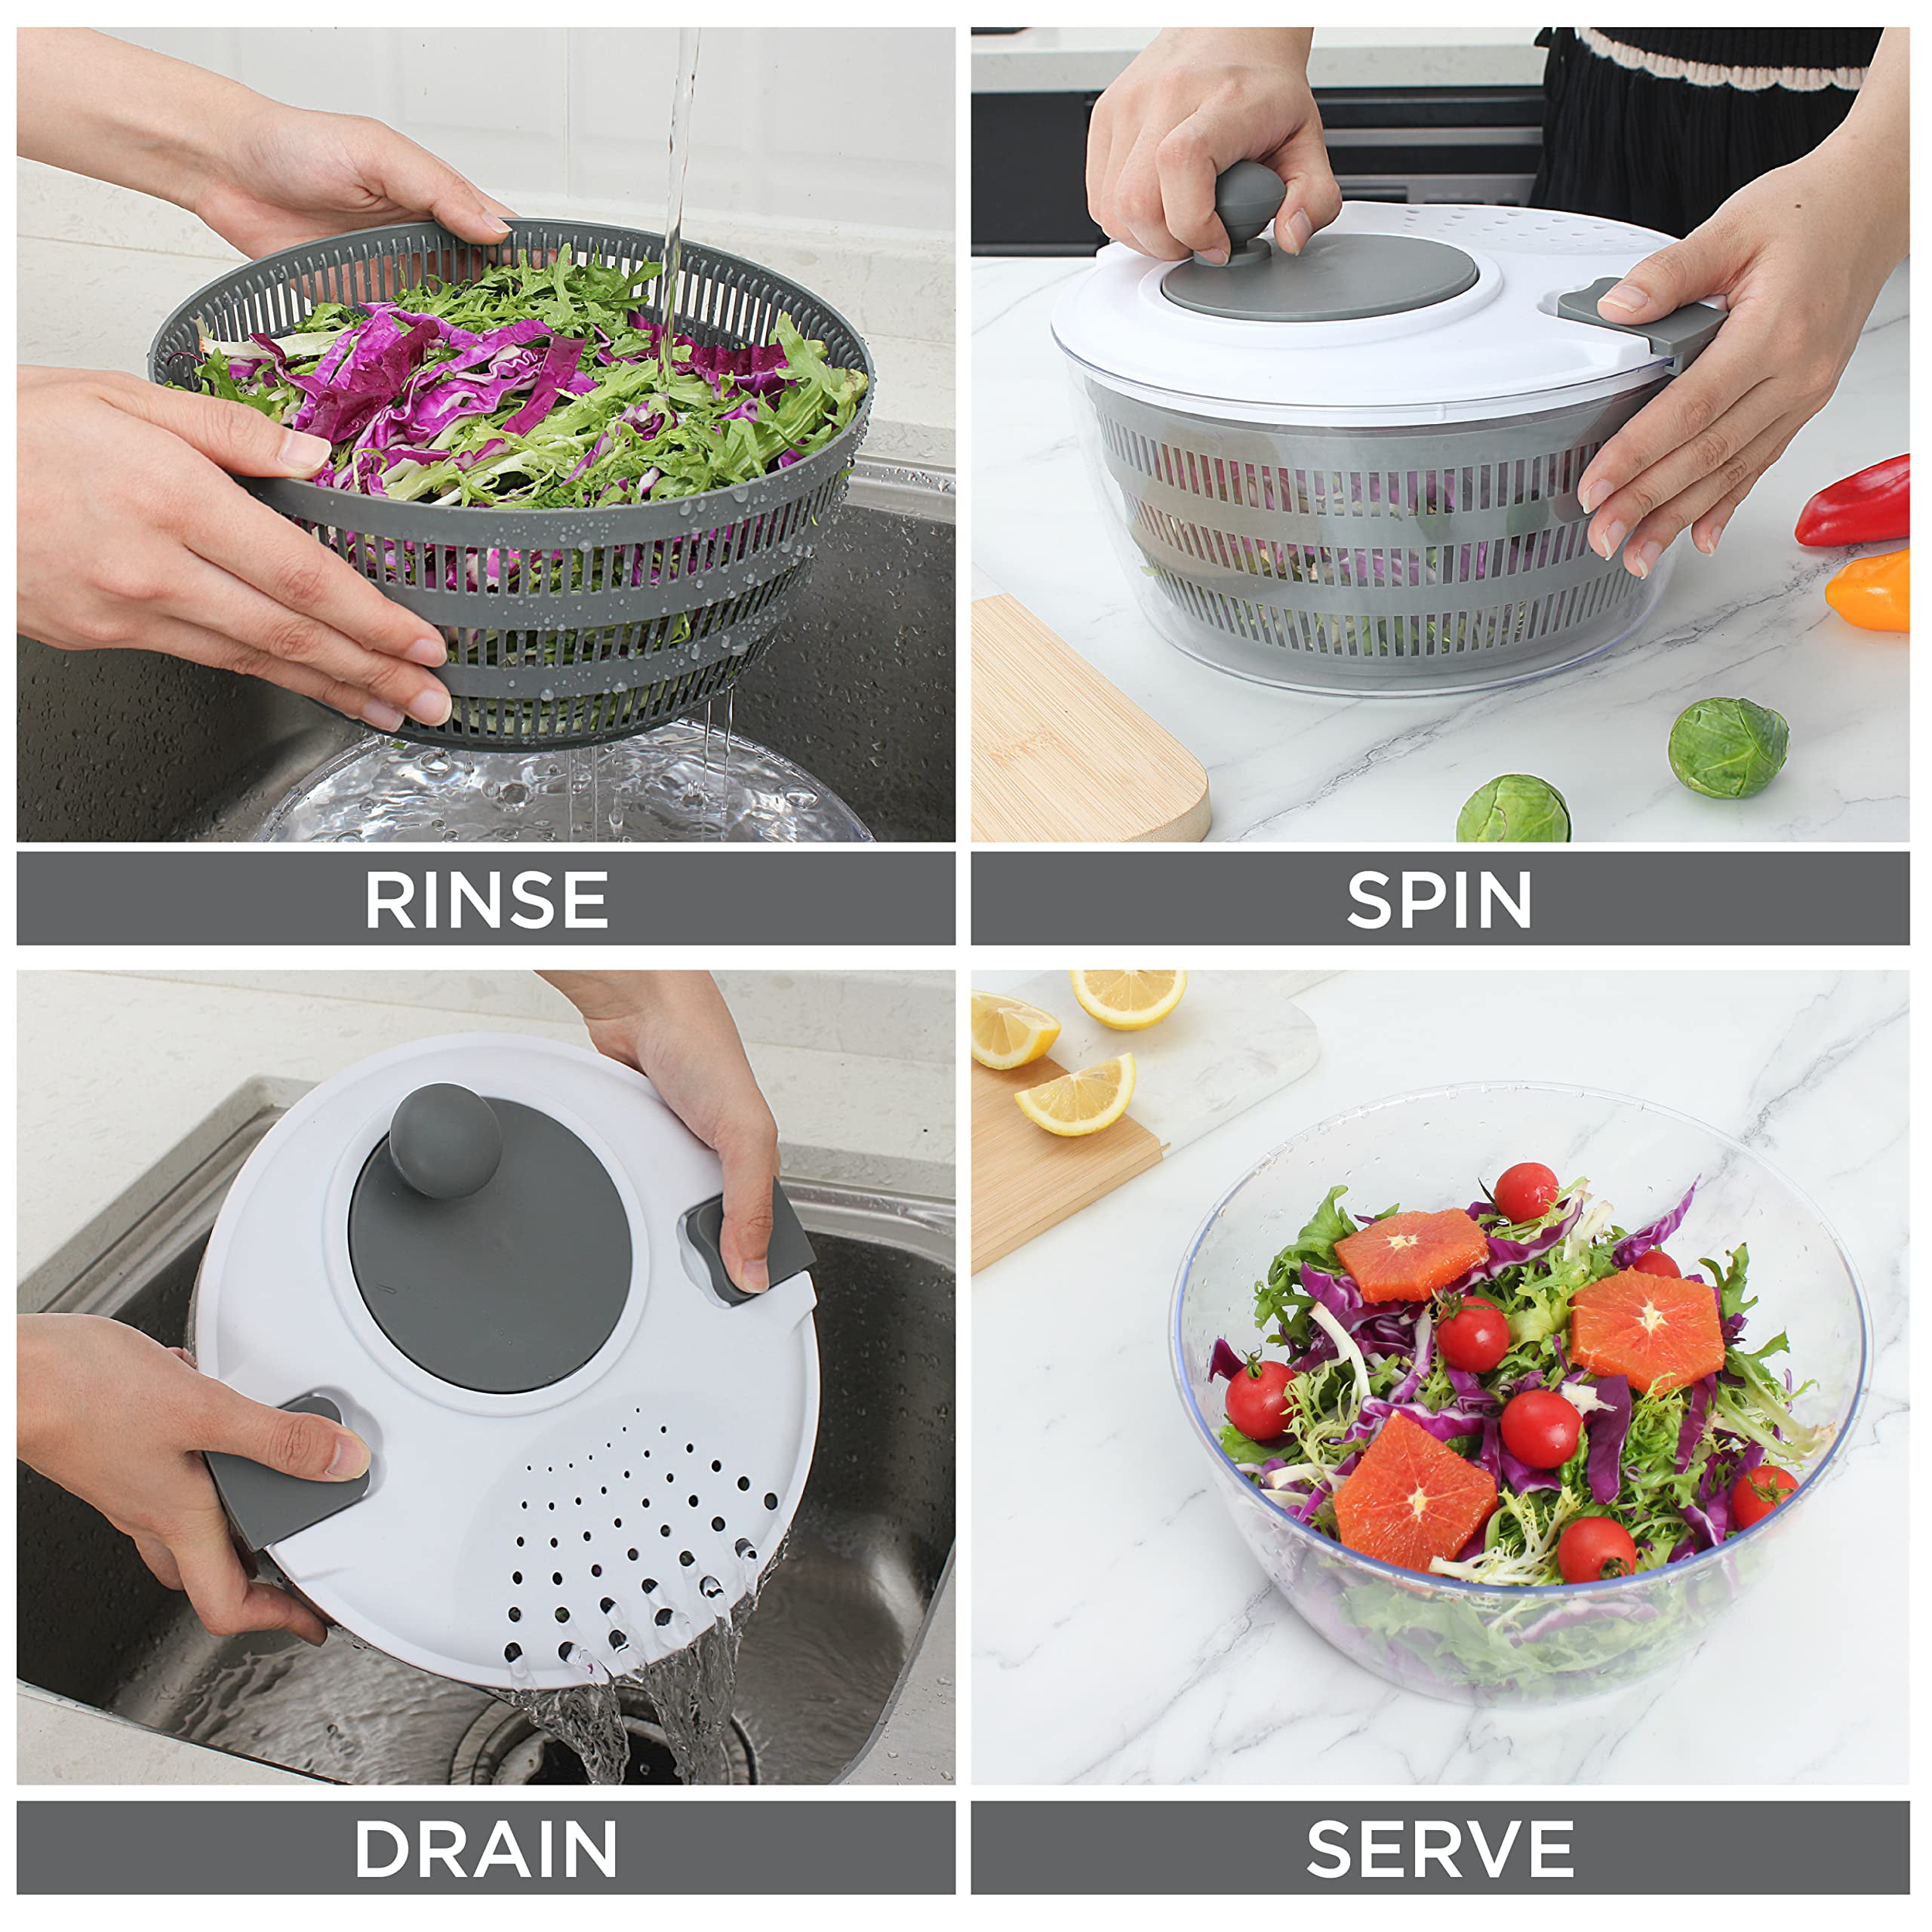  Ourokhome Salad Spinner Lettuce Dryer, Manual Kitchen Gadgets  with Drain, Bowl and Colander, Compact Vegetable Washer with Rotary Handle,  Built-in Draining System, Secure Lid Lock, 4L, Red: Home & Kitchen